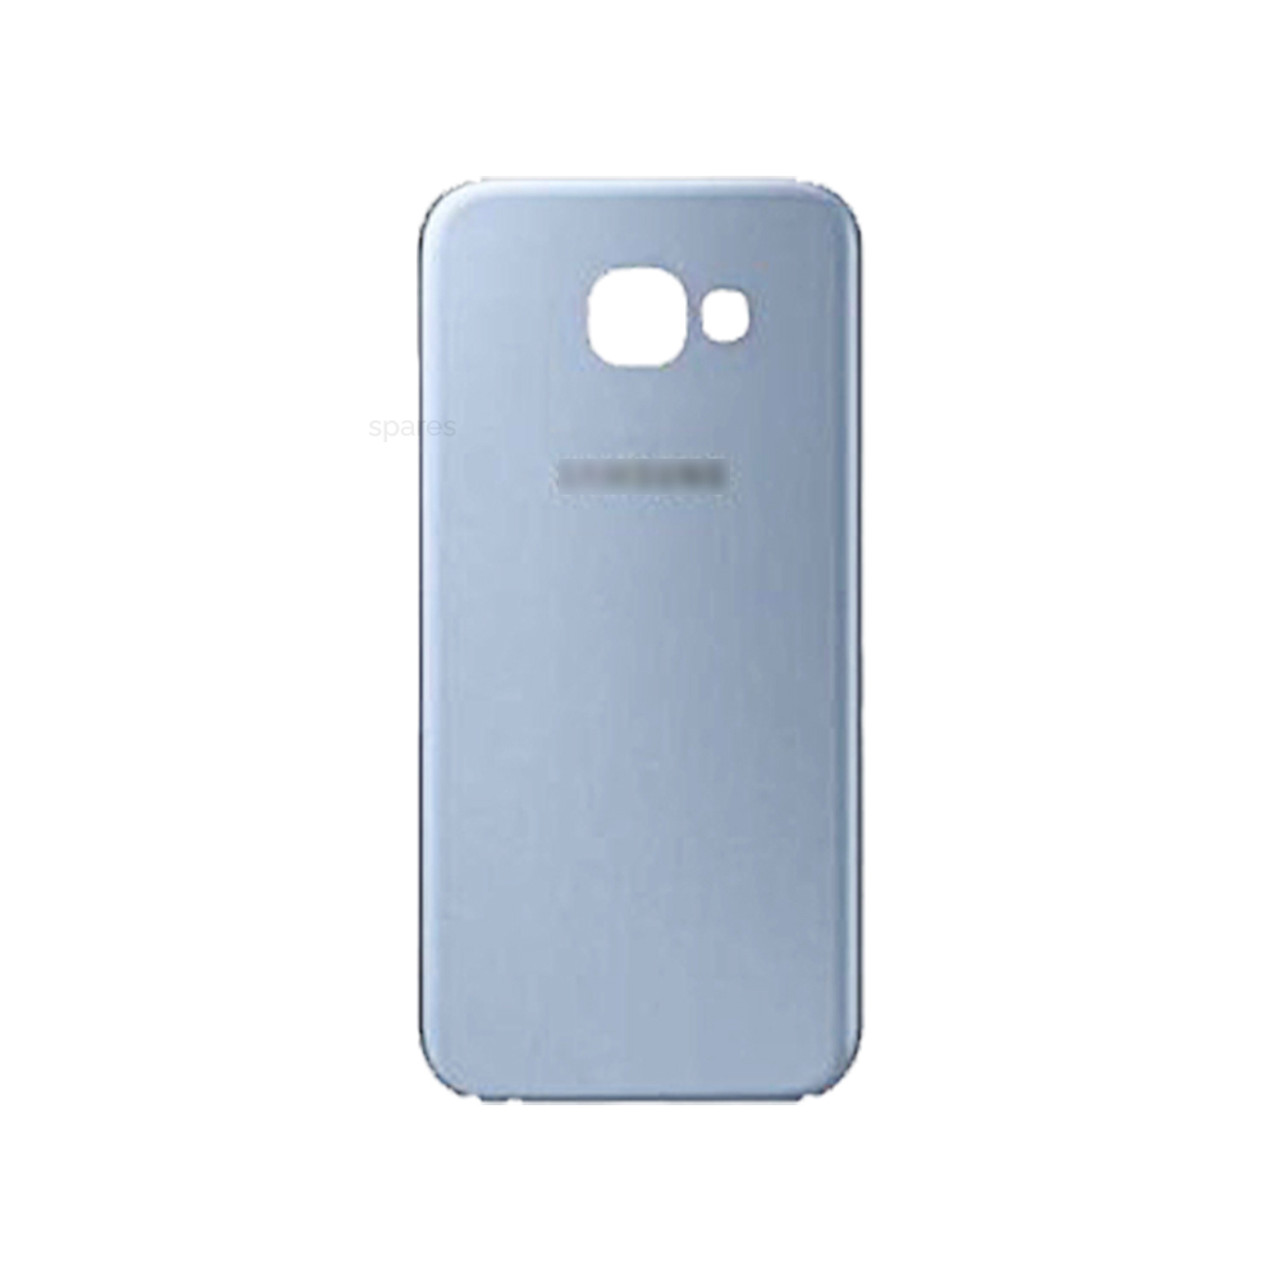 Replace Back Glass With Lens&Adhesive Galaxy A5 2017 SM-A520F Blue Mist